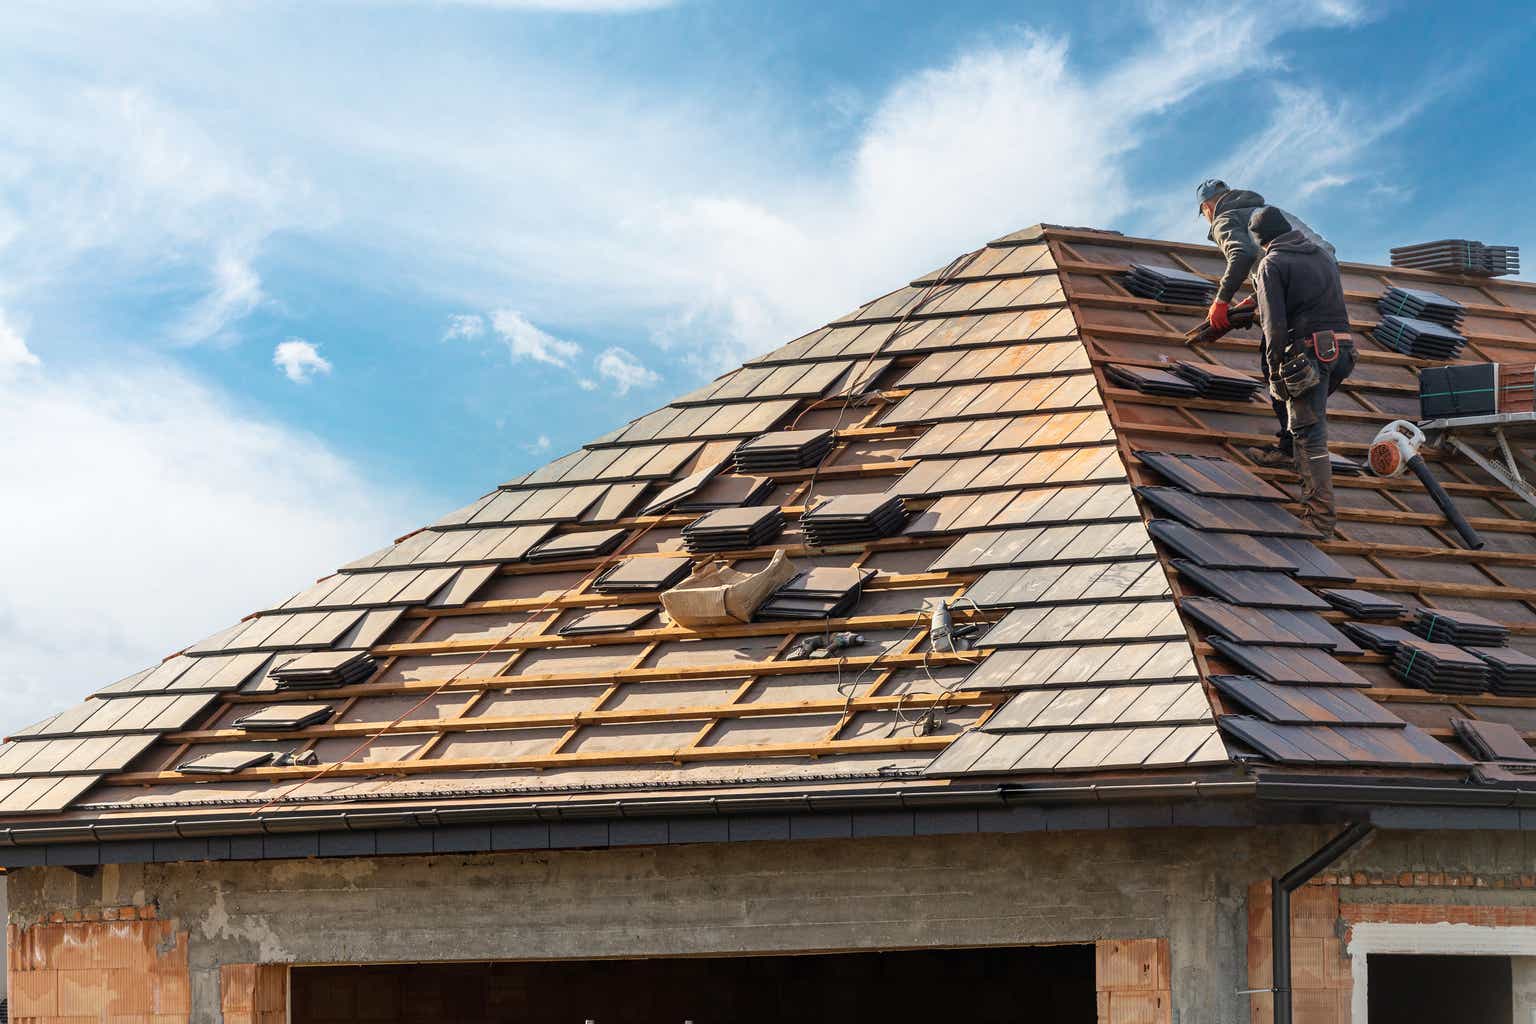 Beacon Roofing Supply: Undervalued Company That Can Be Rewarding